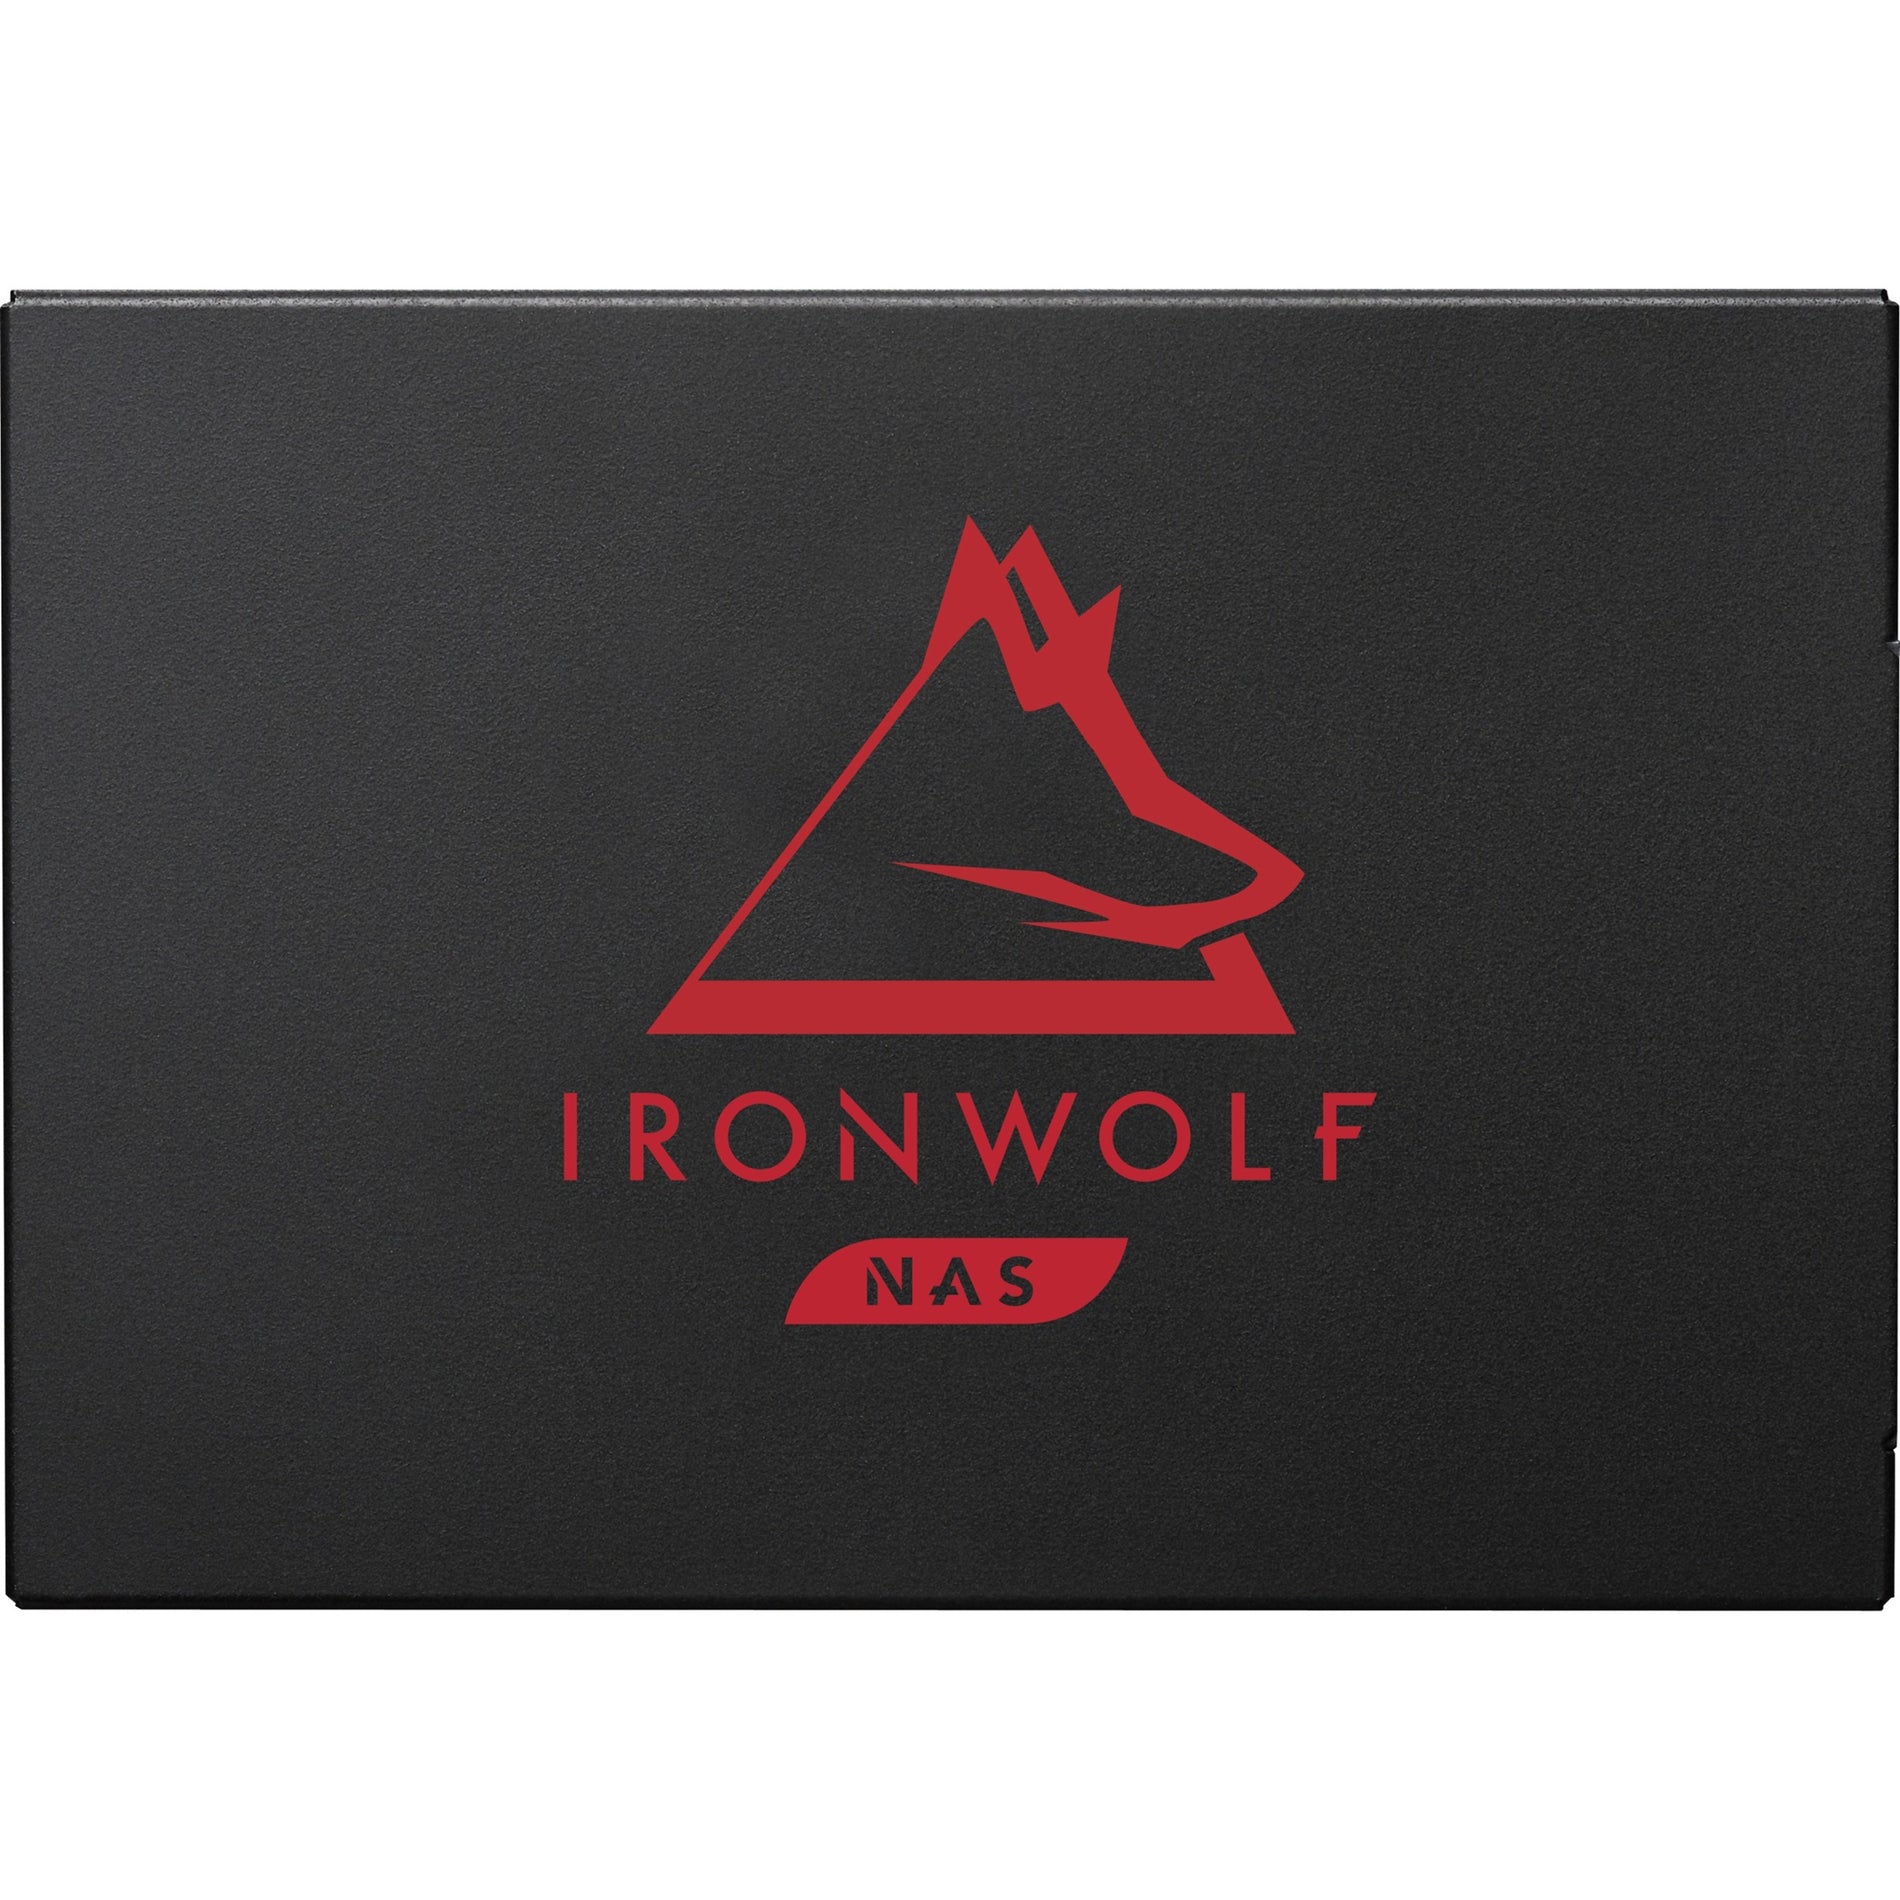 Seagate ZA4000NM1A002 IronWolf 125 SSD 4TB Retail 2.5in SATA 6Gb/s 7mm 3D TLC, High-Capacity Solid State Drive for Reliable Storage